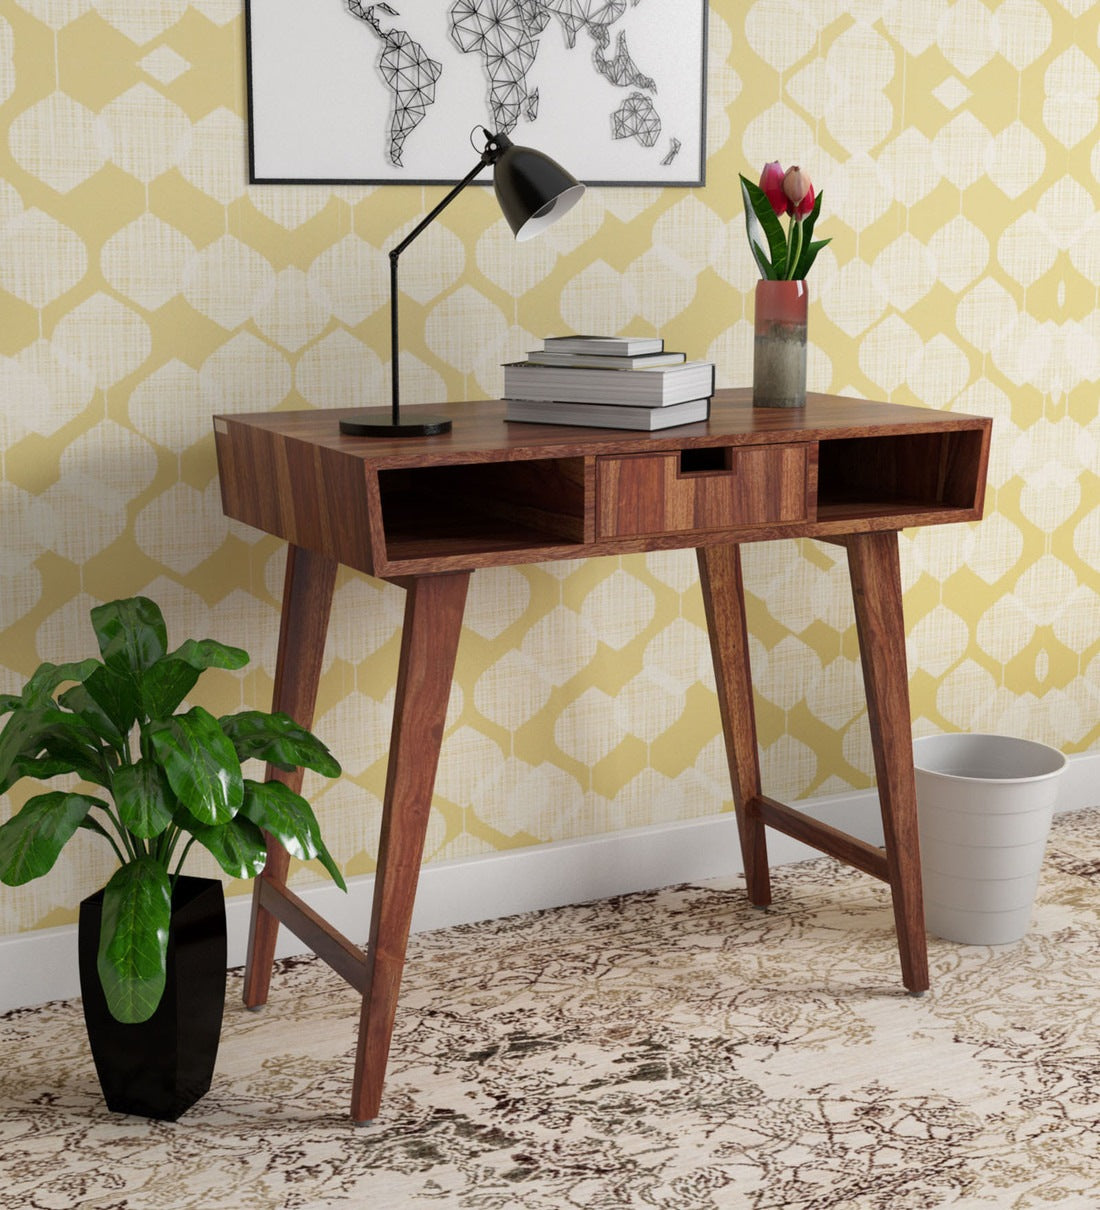 Polremo Wooden Study Table With Drawer For Home & Office in Provincial Teak Finish - Rajwada Furnish